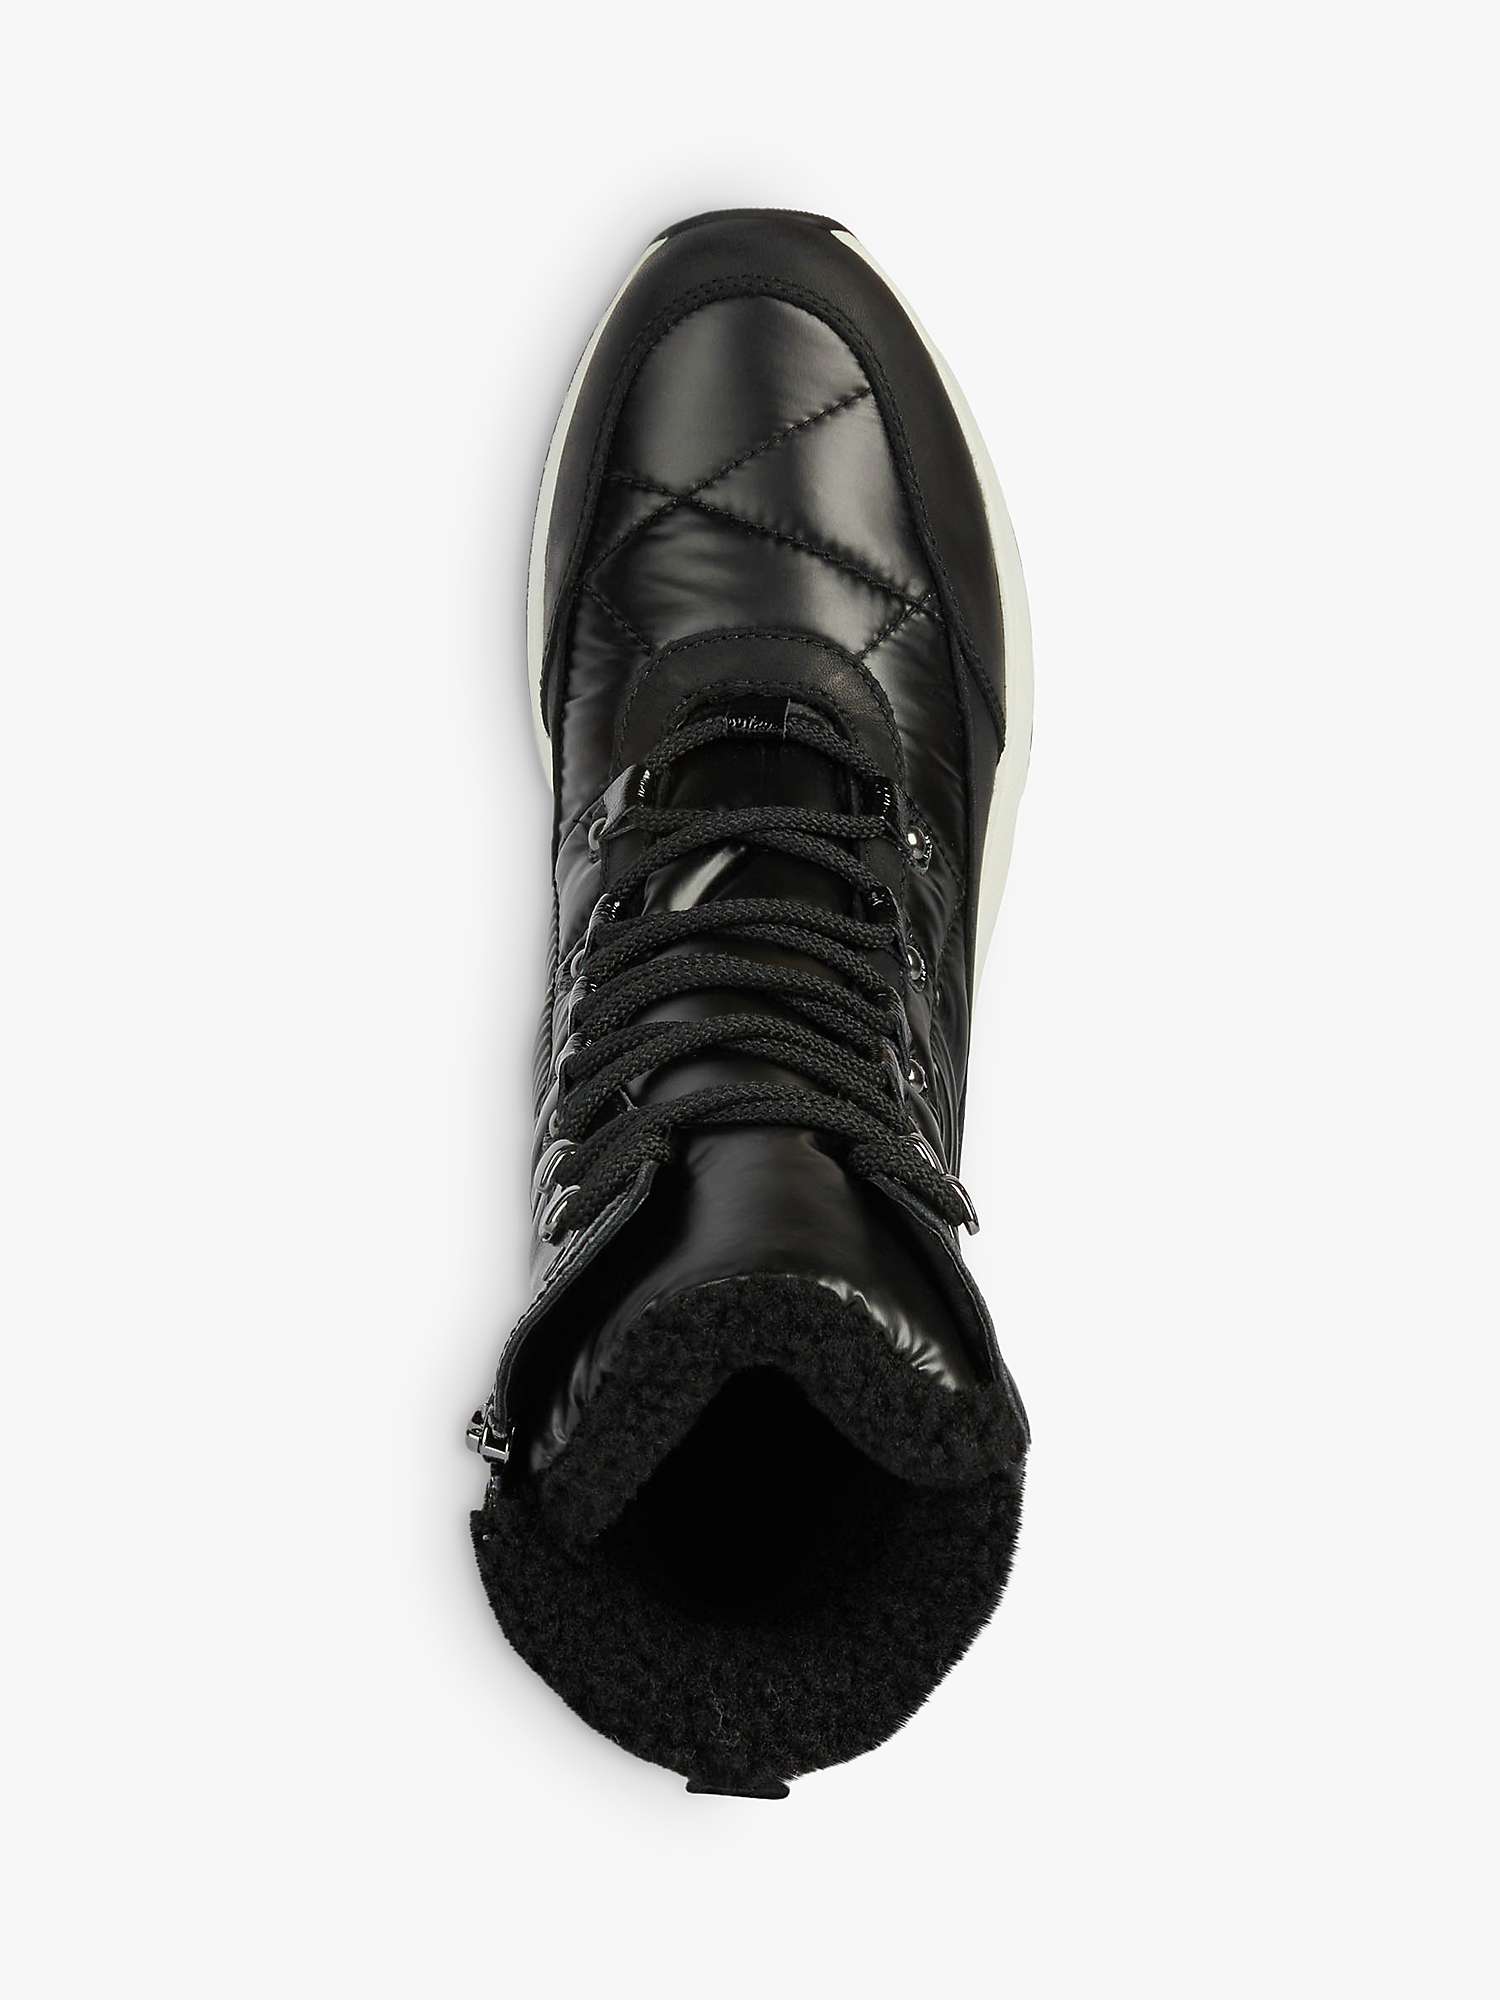 Buy Geox Falena Leather Lace Up Boots Online at johnlewis.com